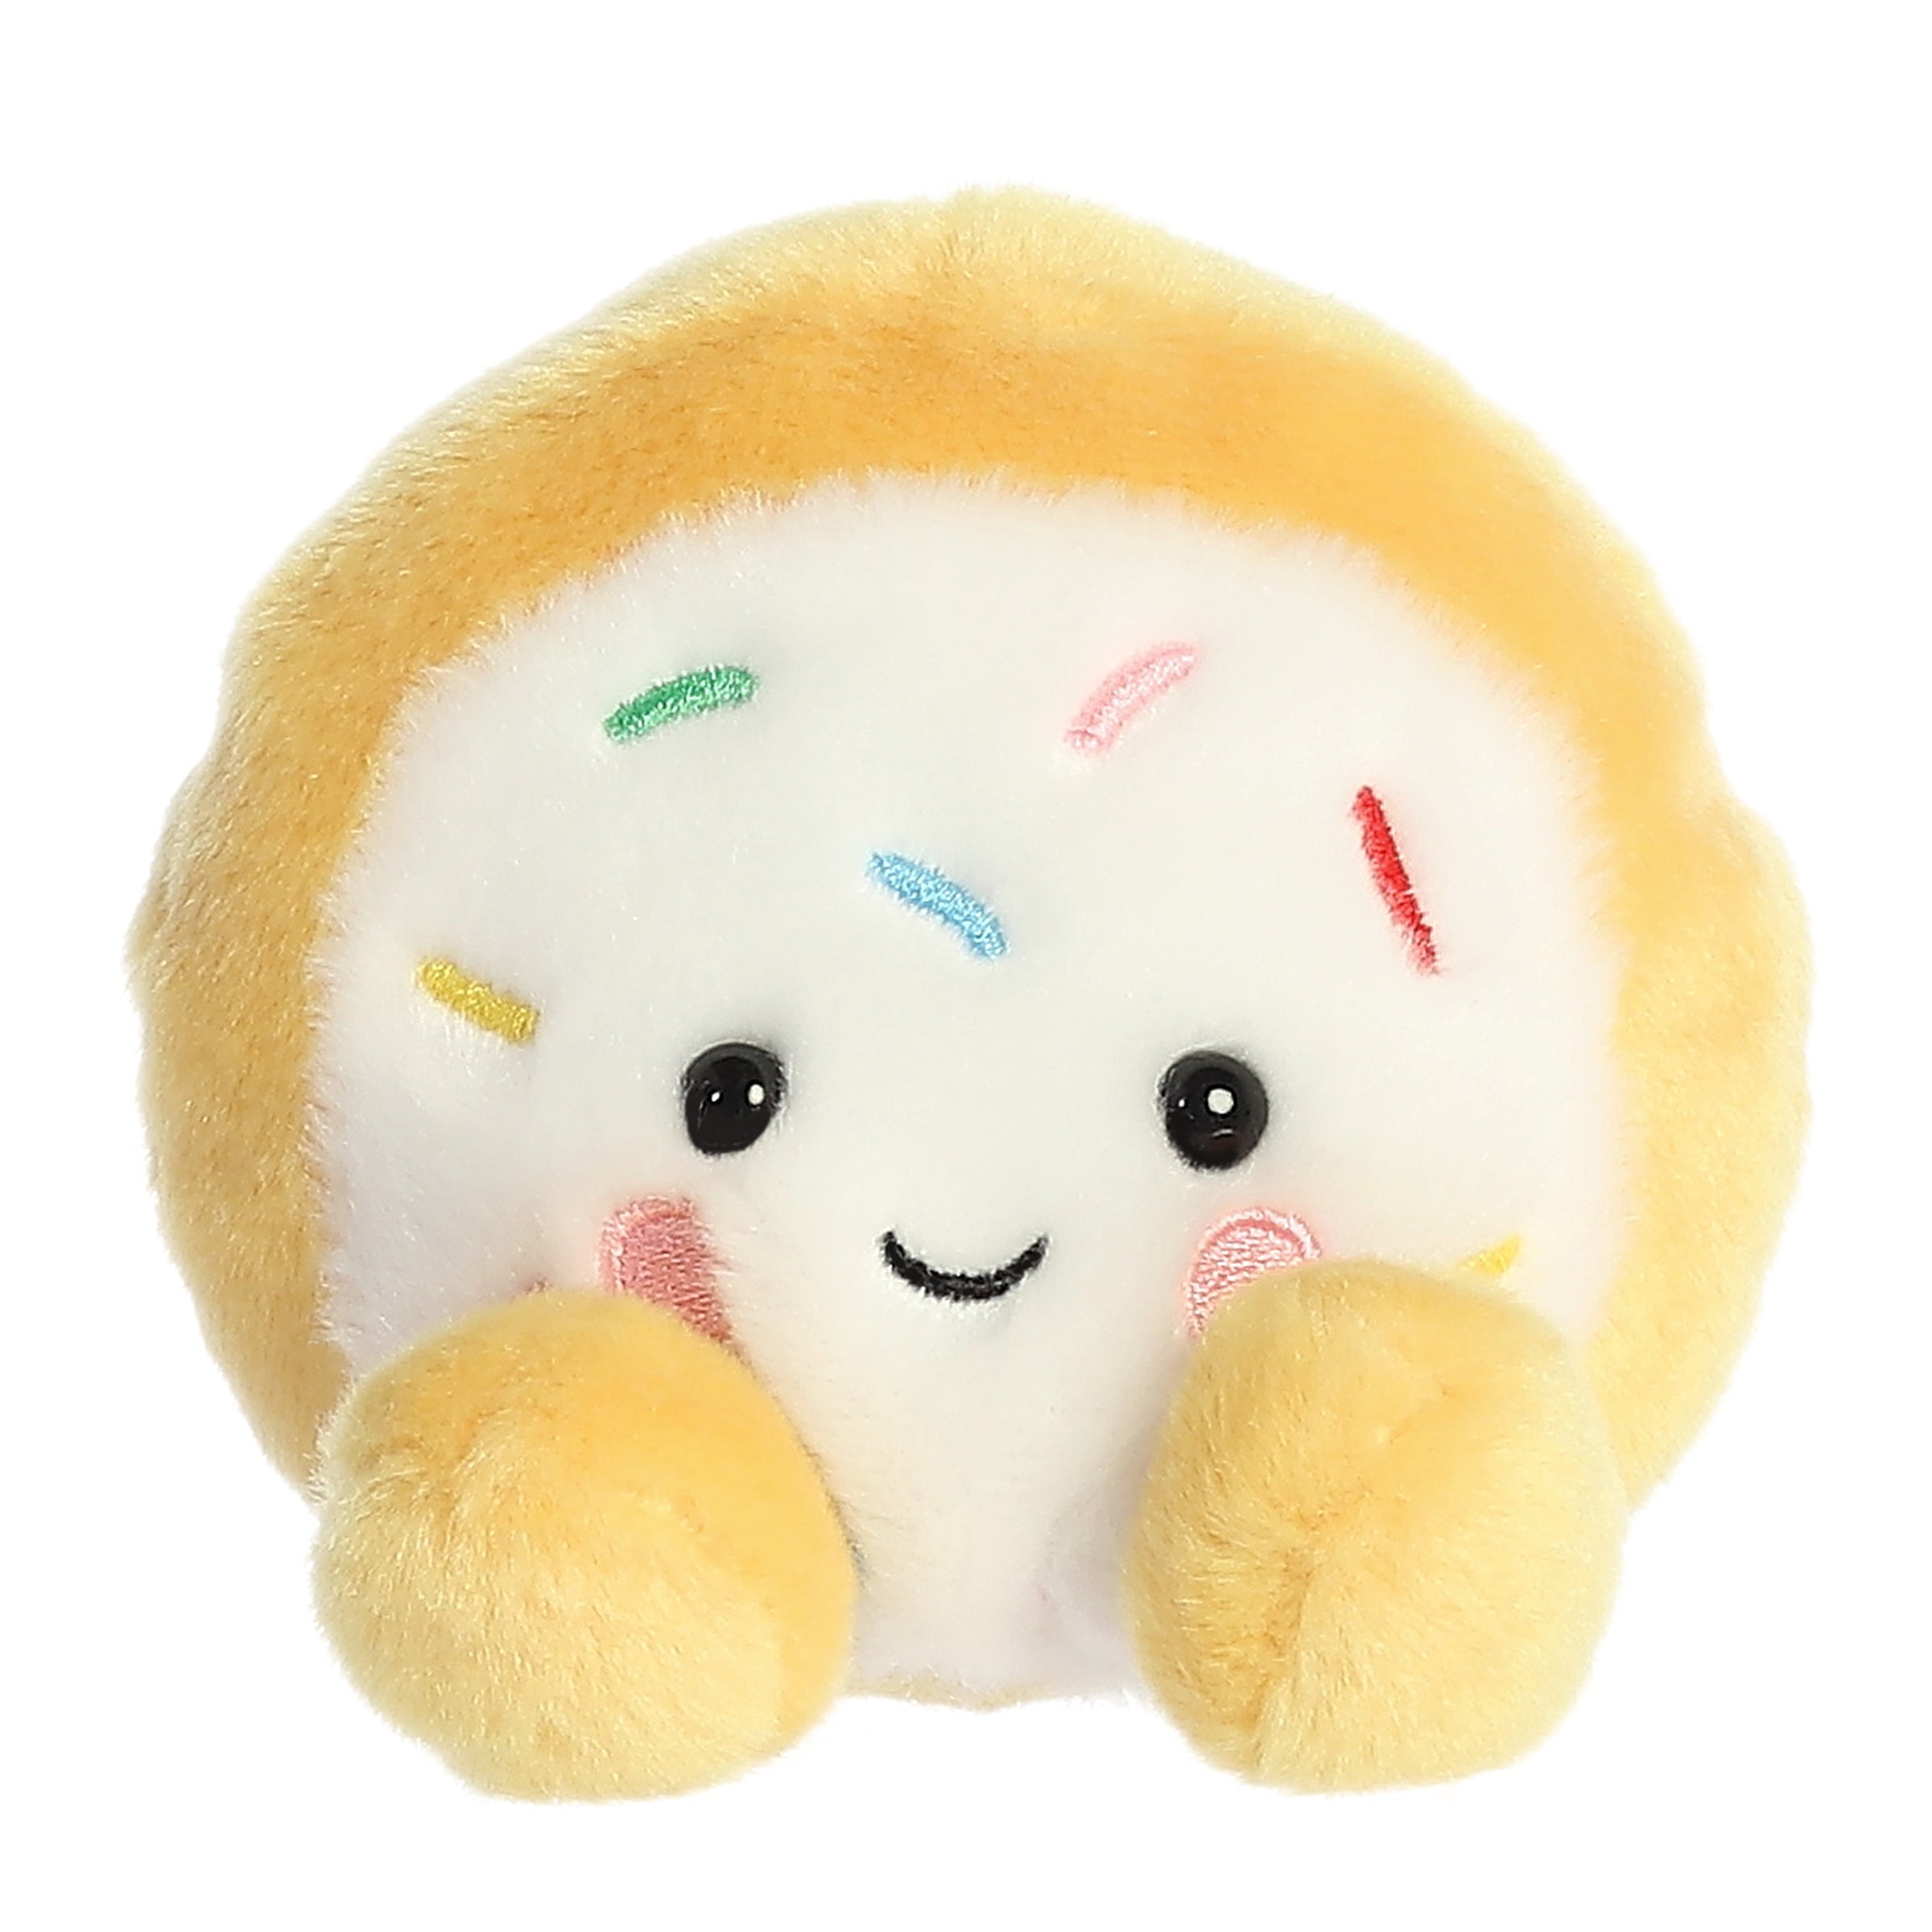 Cookie plush from Palm Pals, showcasing a vibrant yellow base and frosting design, enticingly ready for playful snuggles.